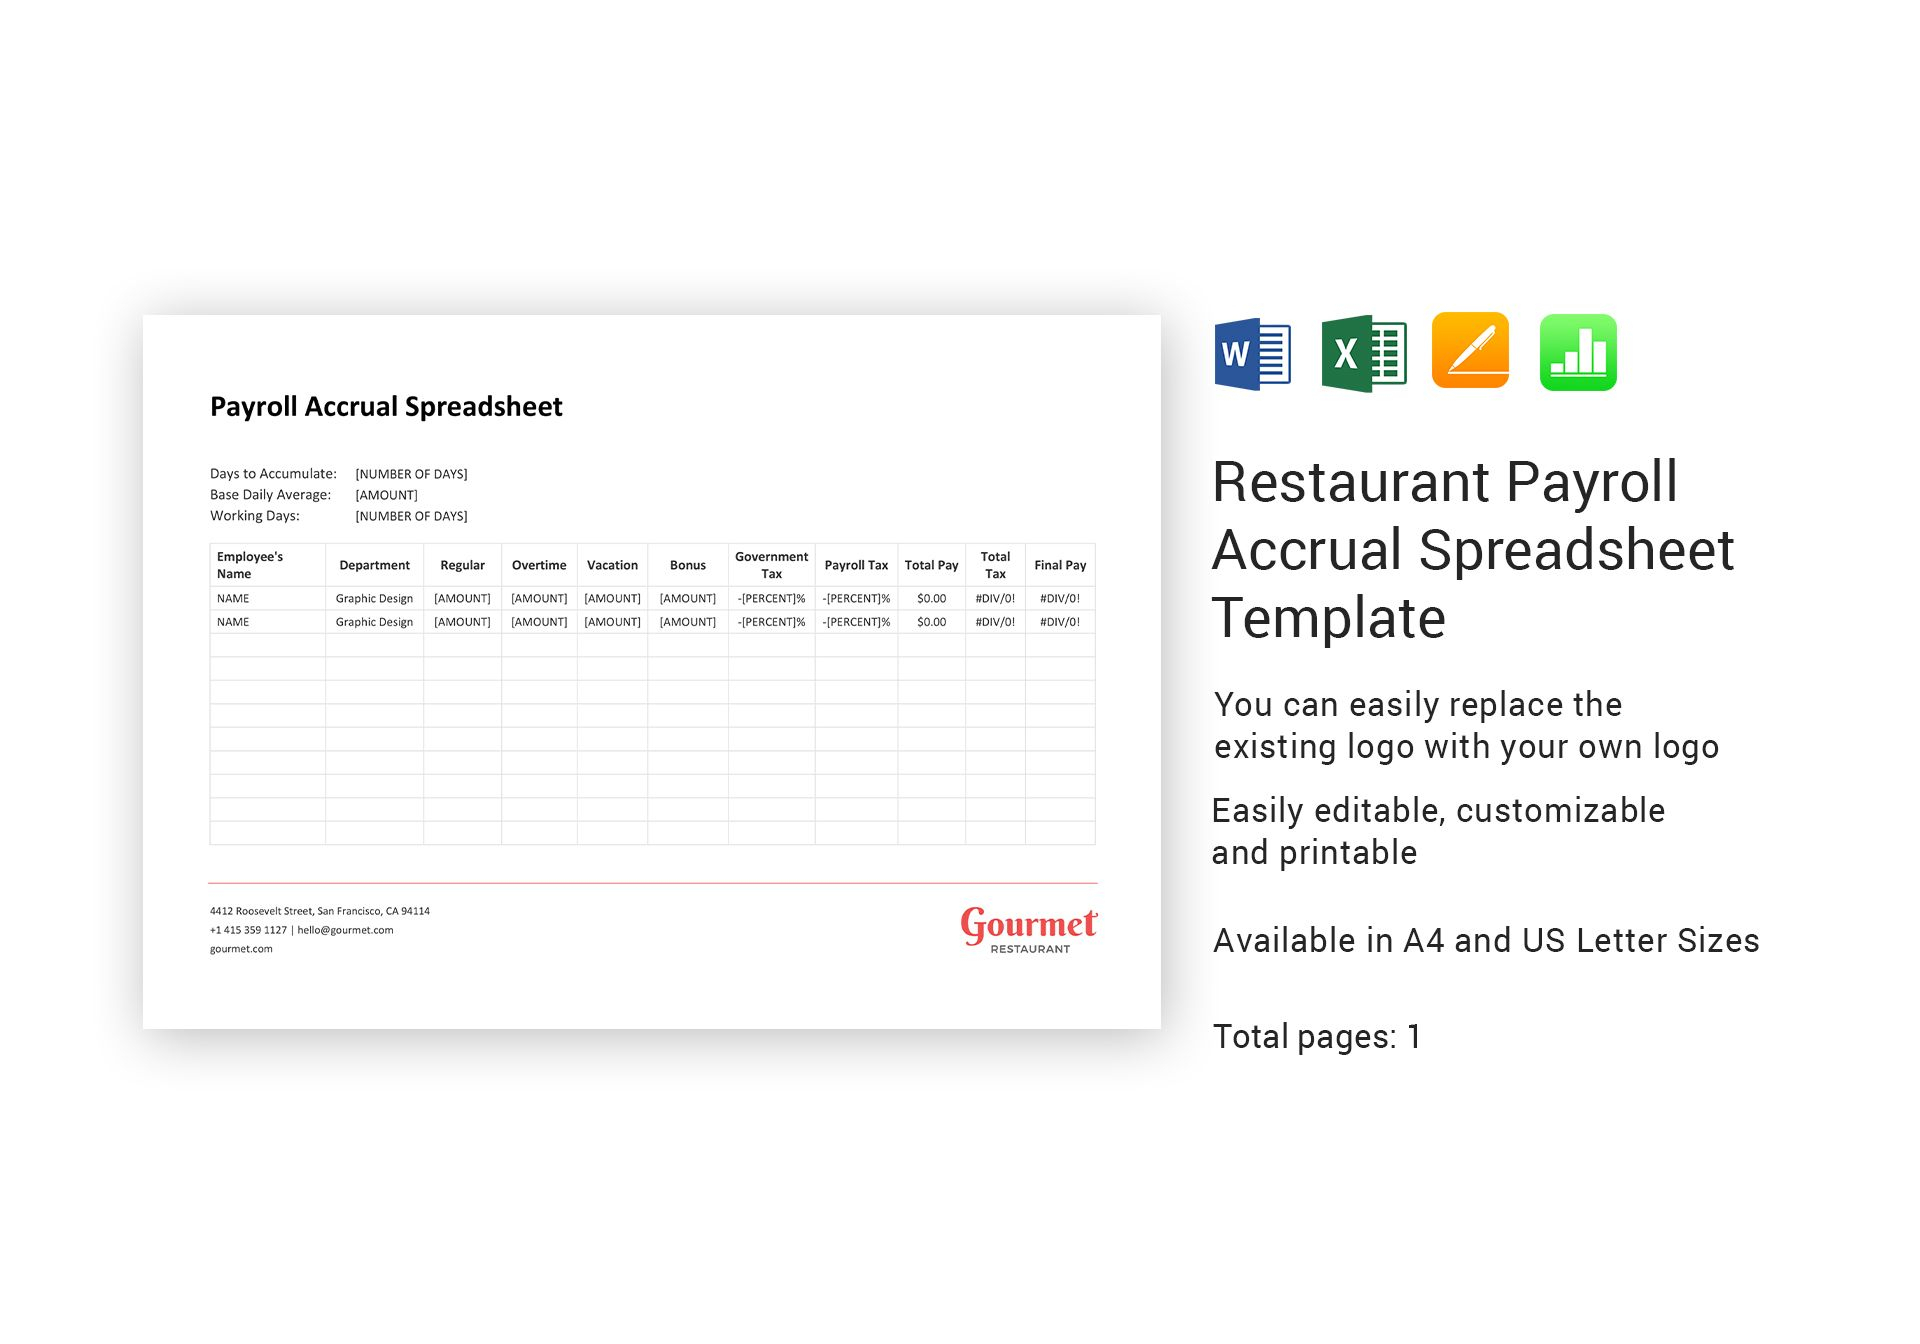 Payroll Accrual Spreadsheet Template with regard to Restaurant Payroll Accrual Spreadsheet Template In Word, Excel